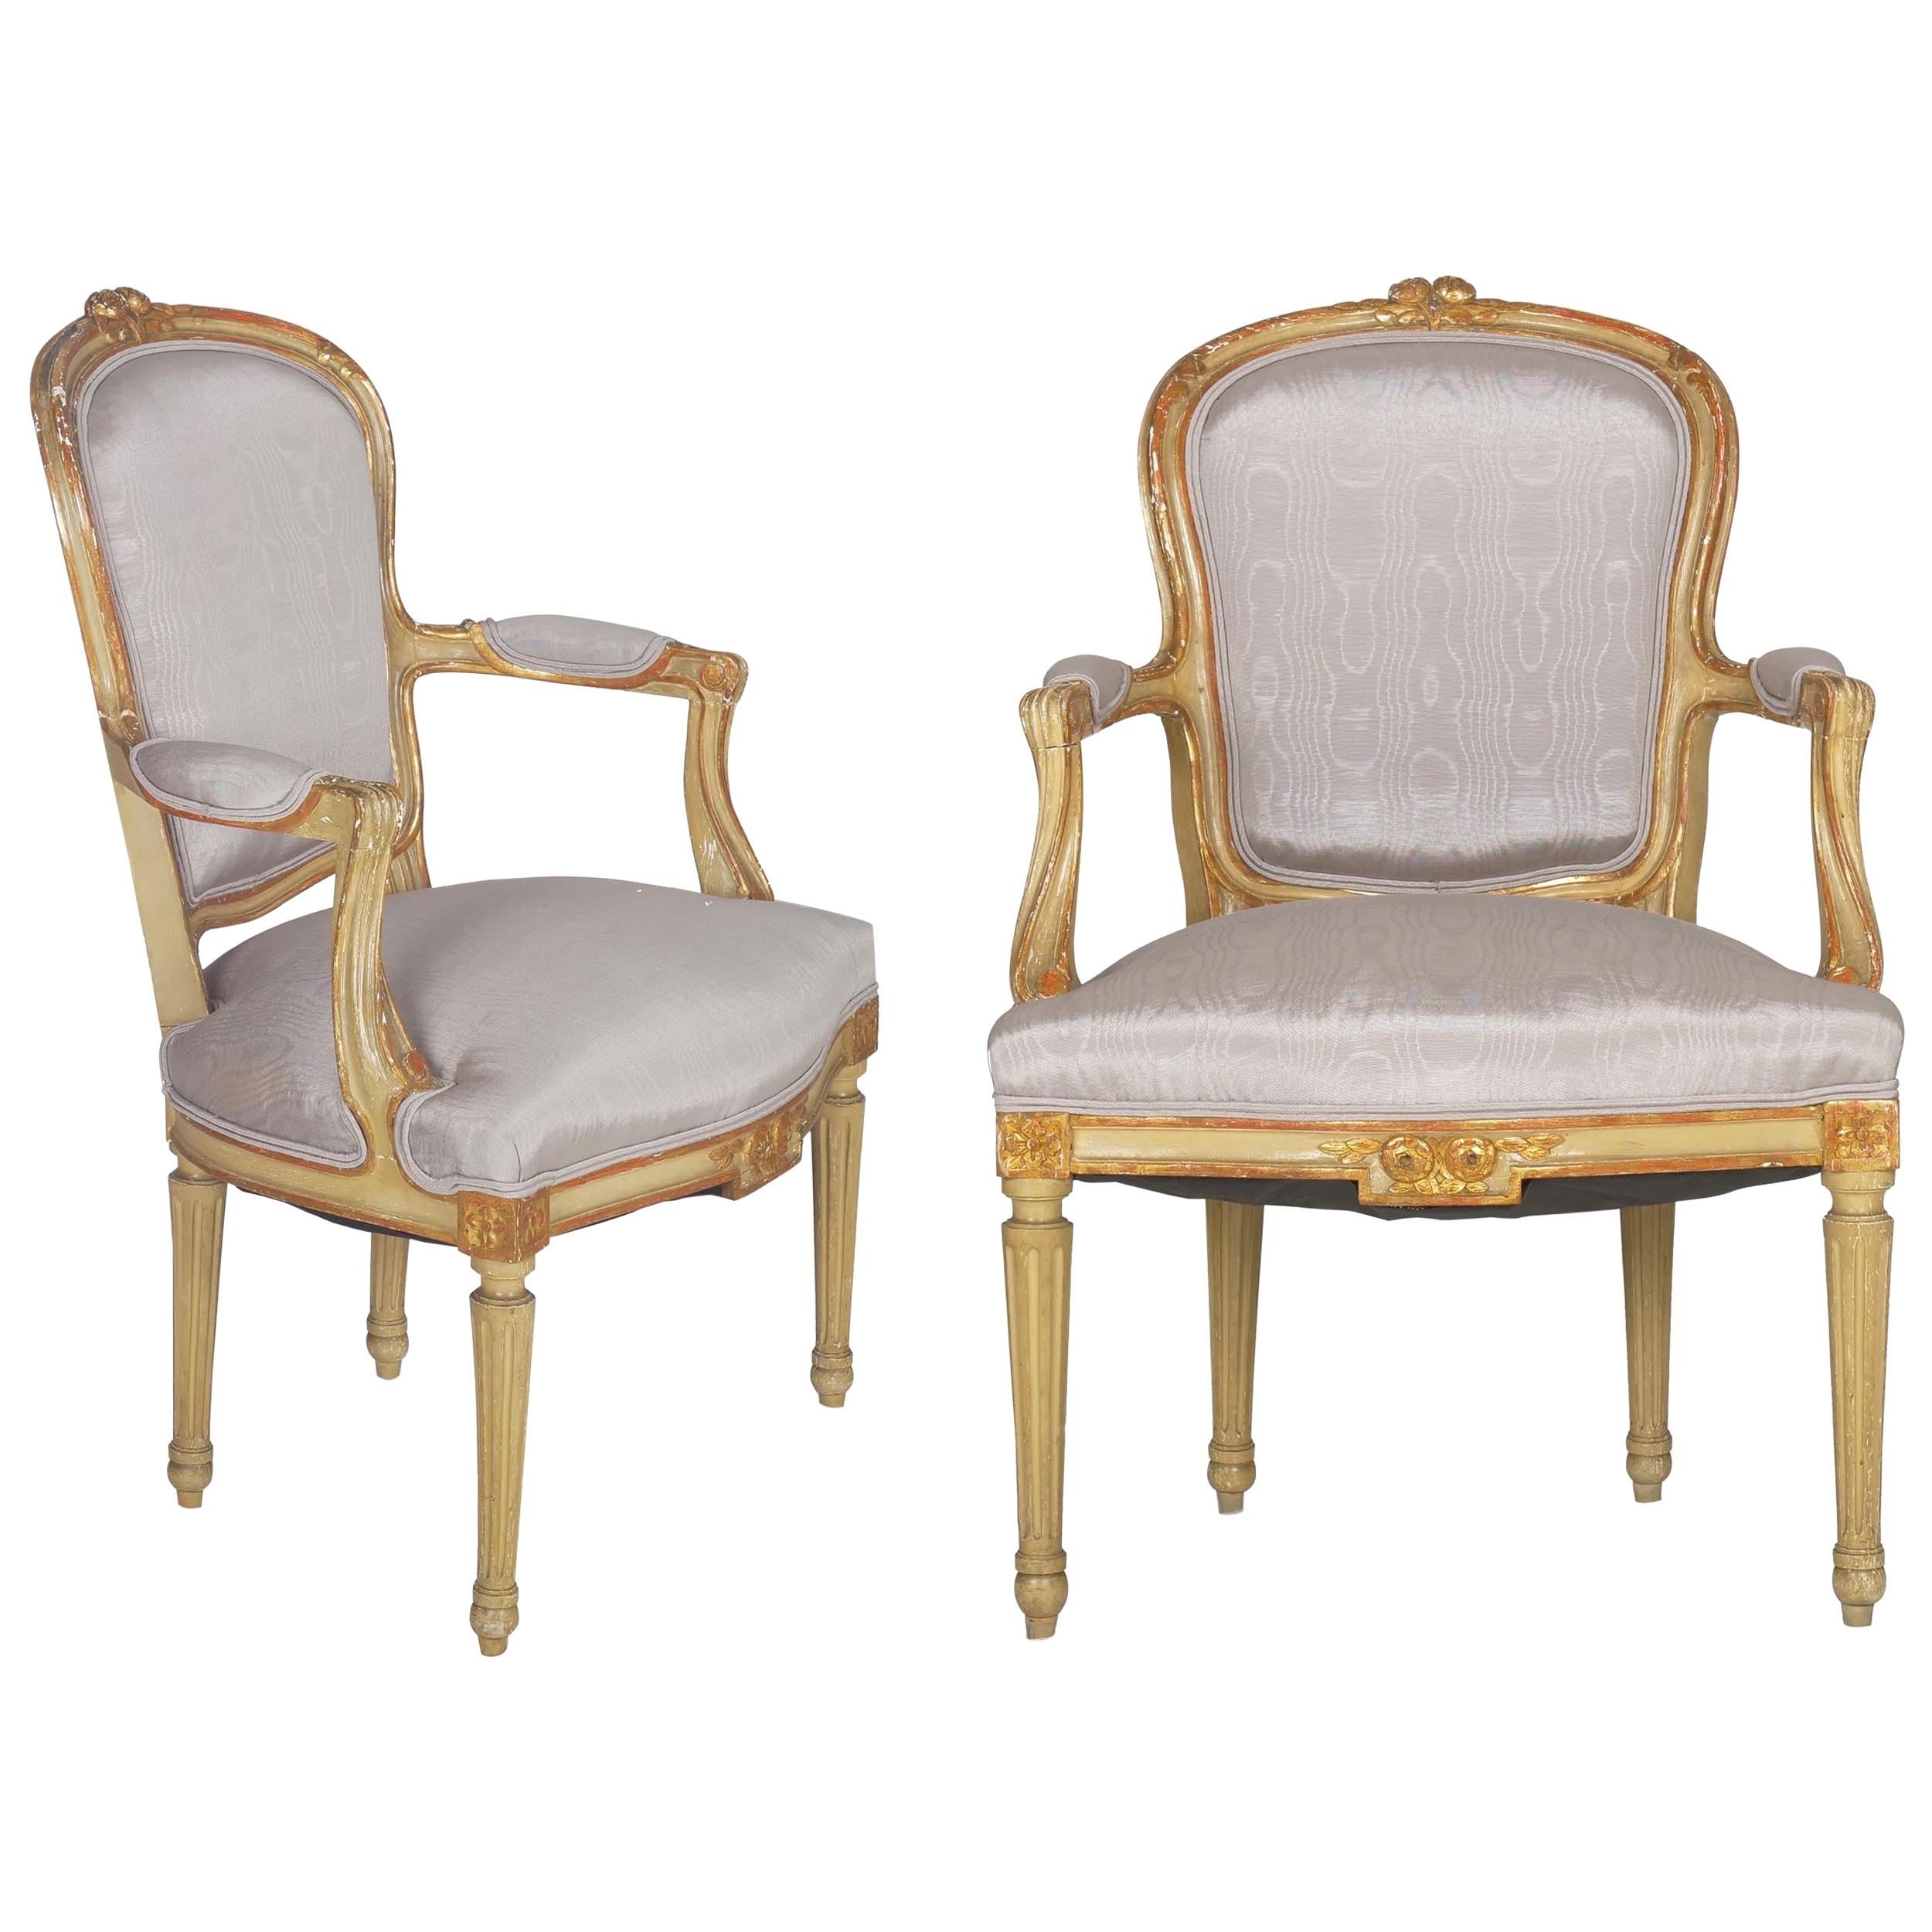 French Louis XVI Style Antique Distressed Painted Armchairs, 19th Century, Pair